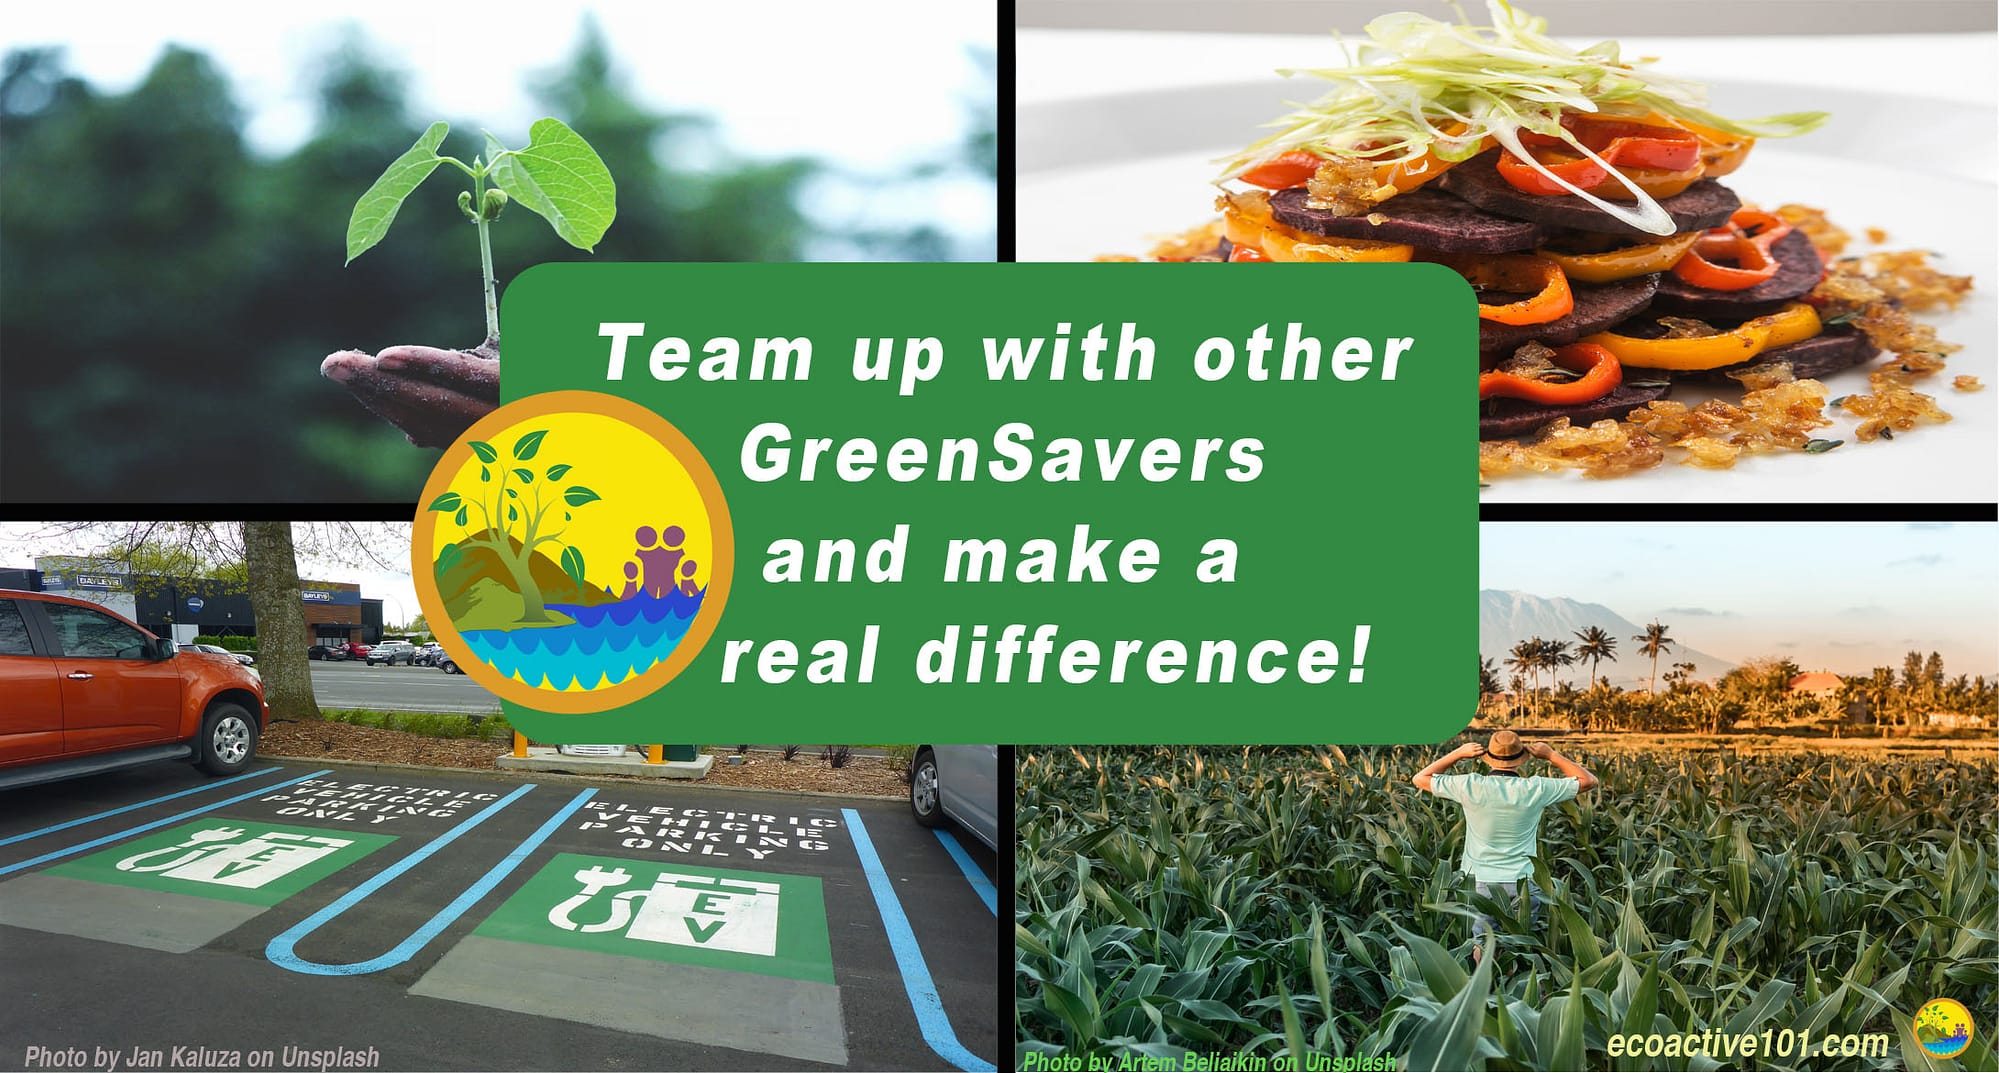 The background shows four scenes: tree planting, electric car charging, regenerative farming, and a vegetarian meal. Superimposed on that are the words, "Team up with other GreenSavers and make a real difference!